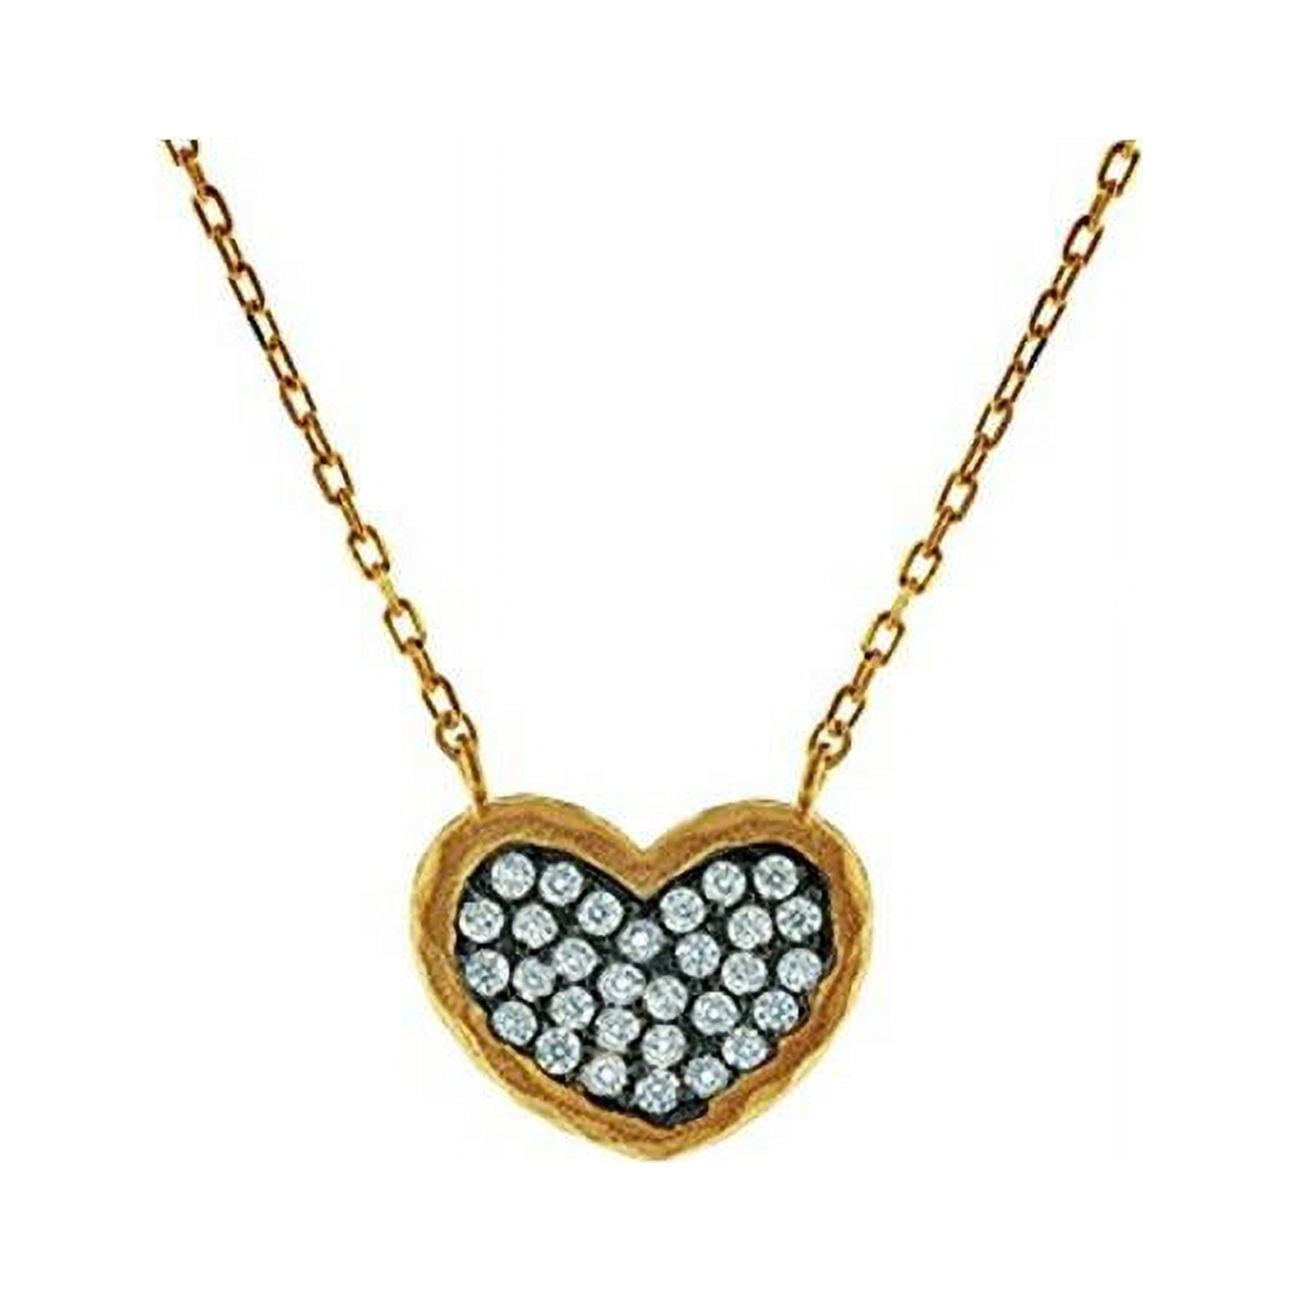 15 In. Plus 2 In. Extension Silver Gold Plated Hearth Cubic Zirconia Rhodium Pendant 14 Mm Hammered Look Necklace, Black